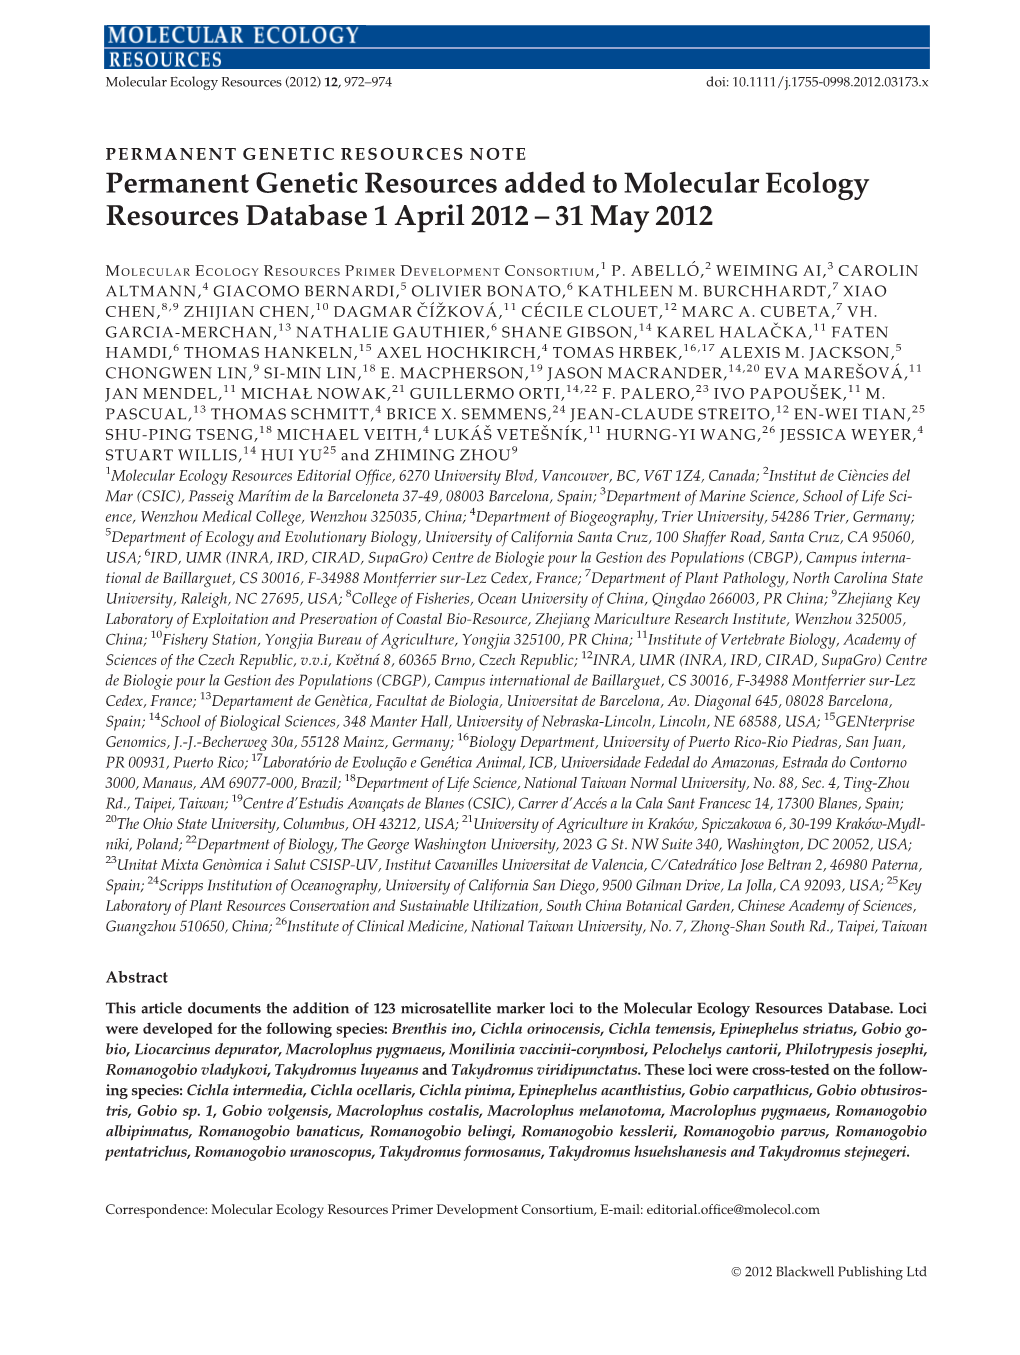 Permanent Genetic Resources Added to Molecular Ecology Resources Database 1 April 2012 – 31 May 2012